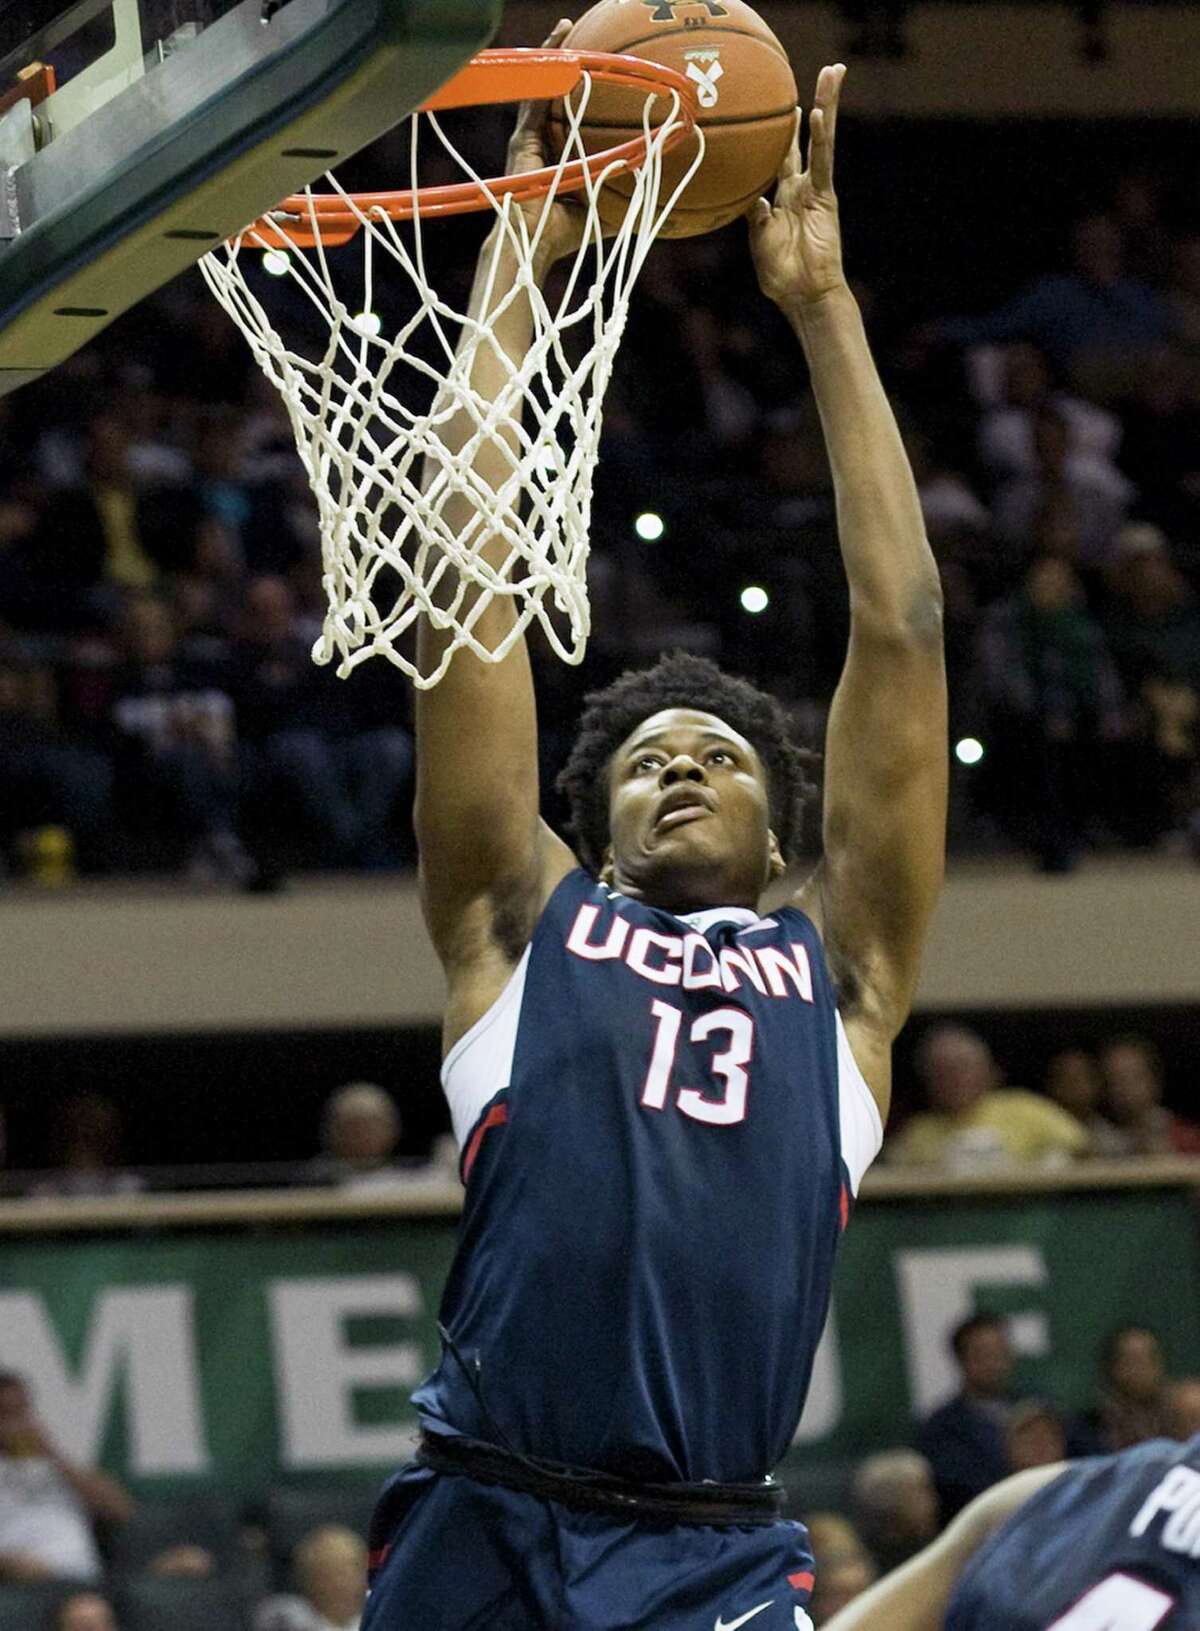 Norwalk’s Steven Enoch didn’t see a whole lot of playing time in his two seasons at UConn.